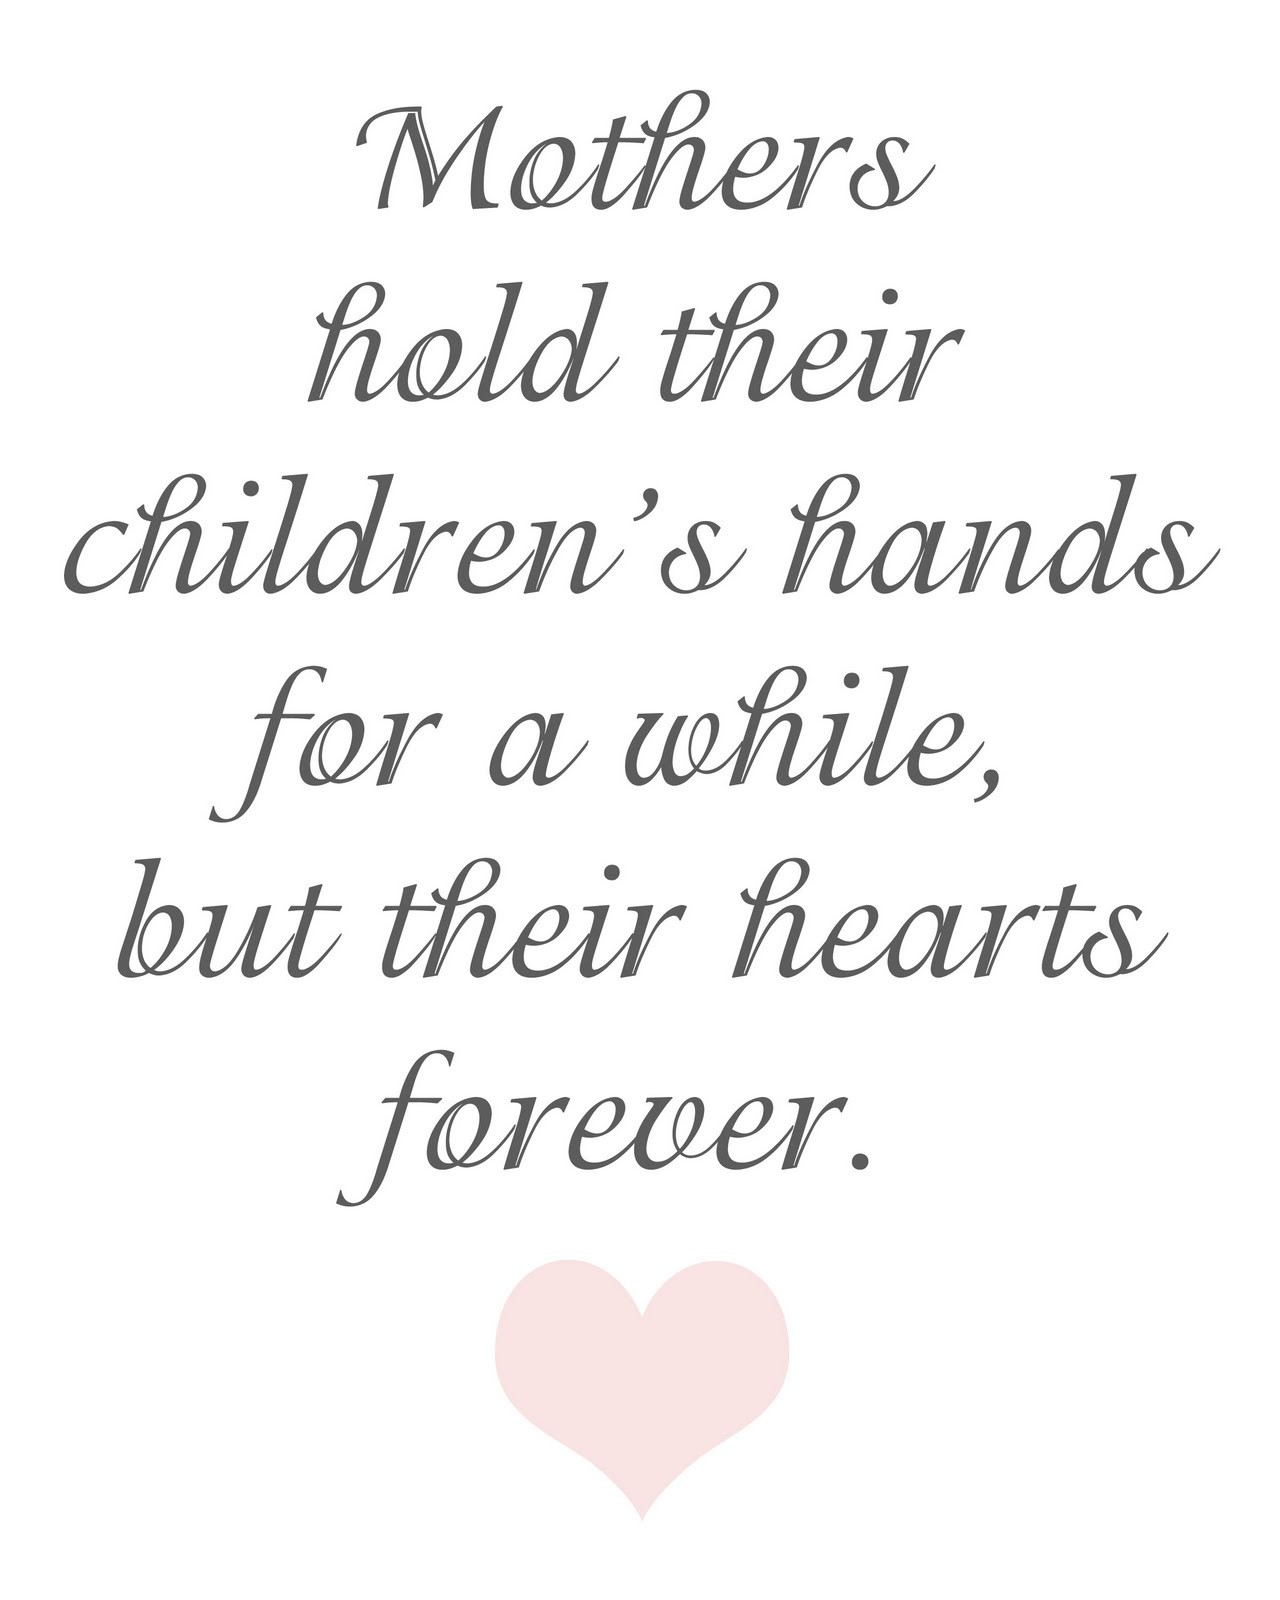 Quotes About Mother
 35 Adorable Quotes About Mothers – The WoW Style